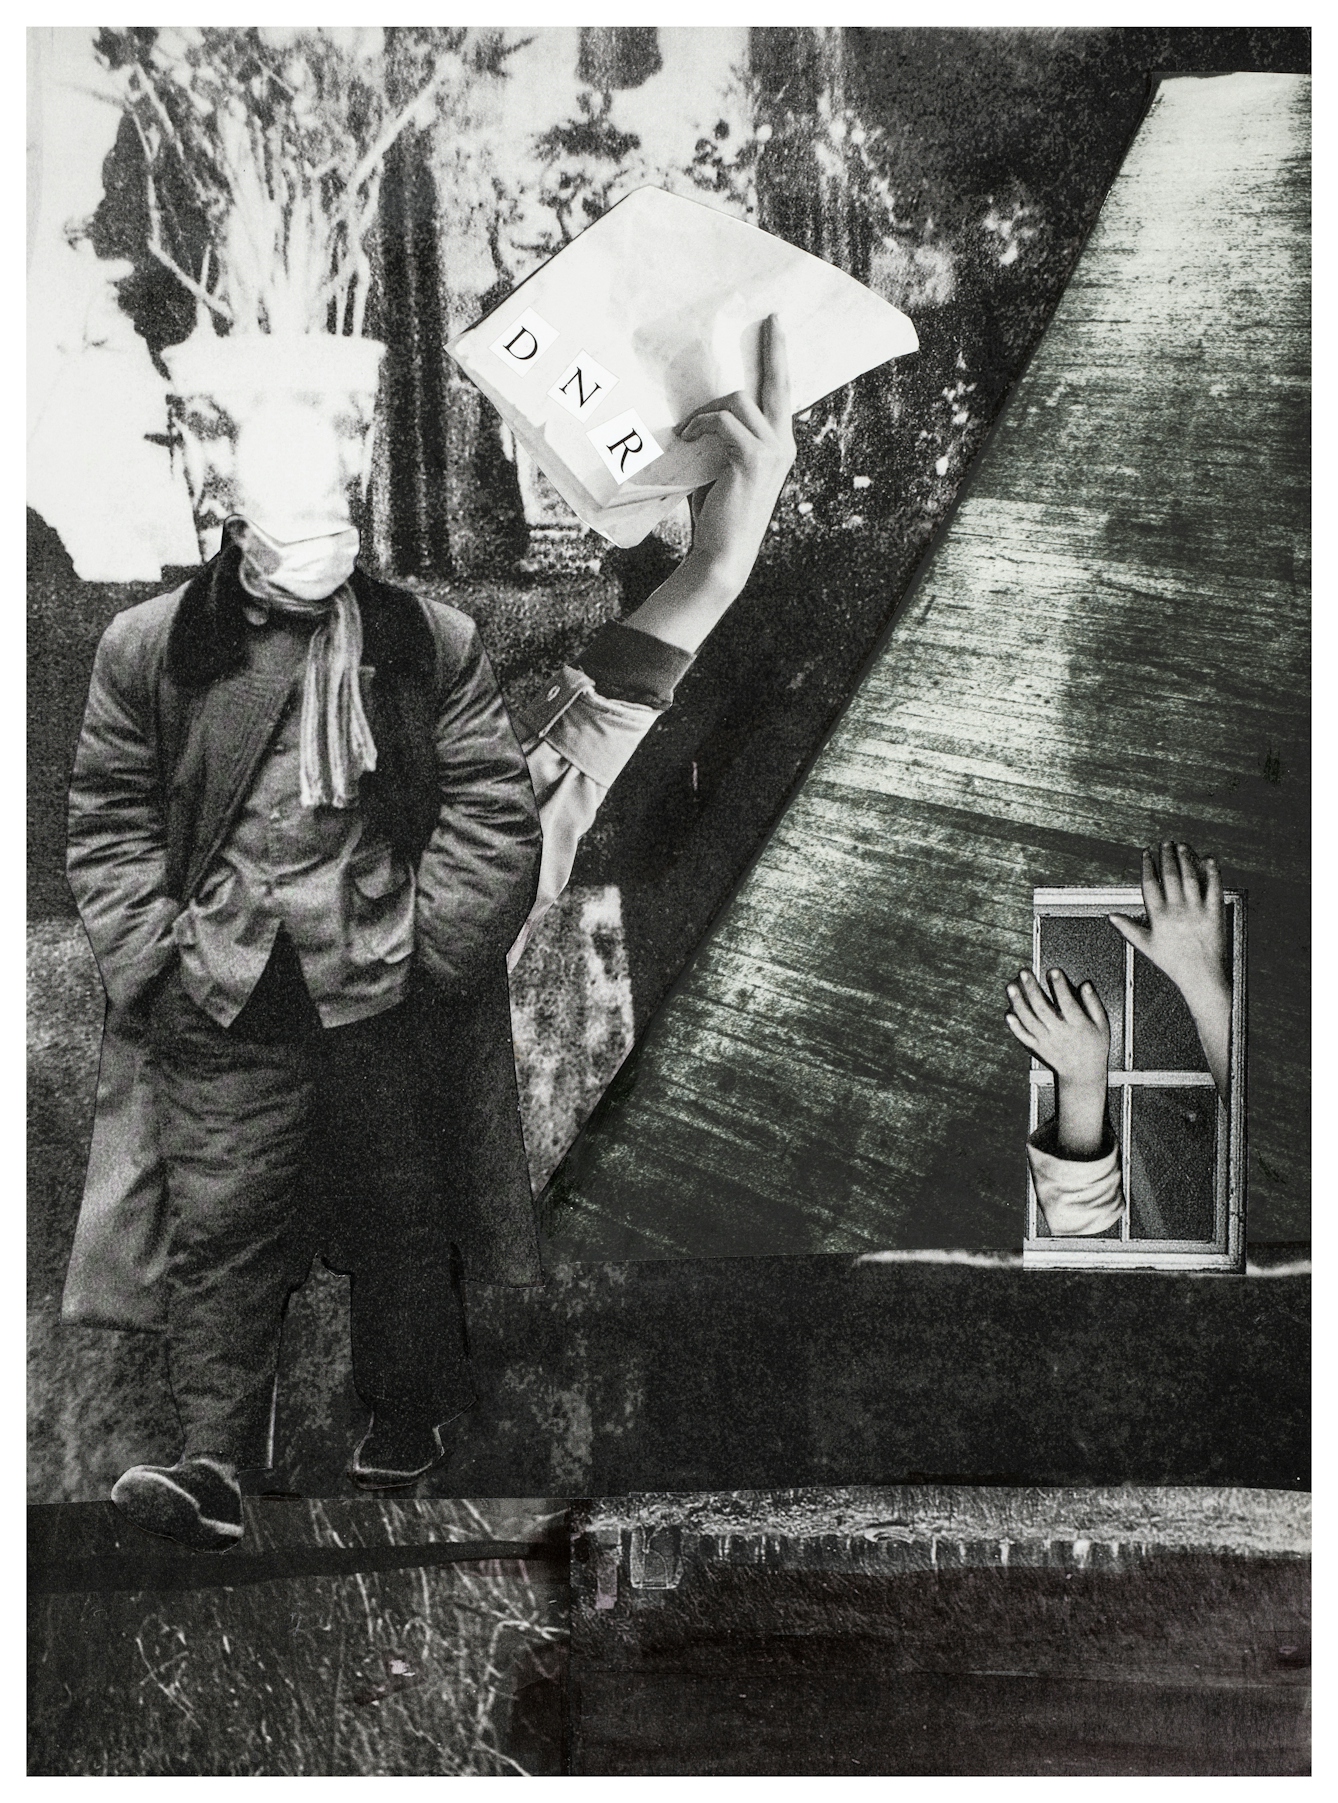 Photographic collage using images cut out from magazines and books. The scene depicts a man in full length walking with his hands in his pockets. His head seems to be covered in bag but it is clear he is wearing a white surgical face mask.Behind him an arm reaches up clasping papers with the letters DNR on the front. To the right is a window with two hands and arms reaching through it. The overall tones of the collage are monotone, blacks, whites and greys.